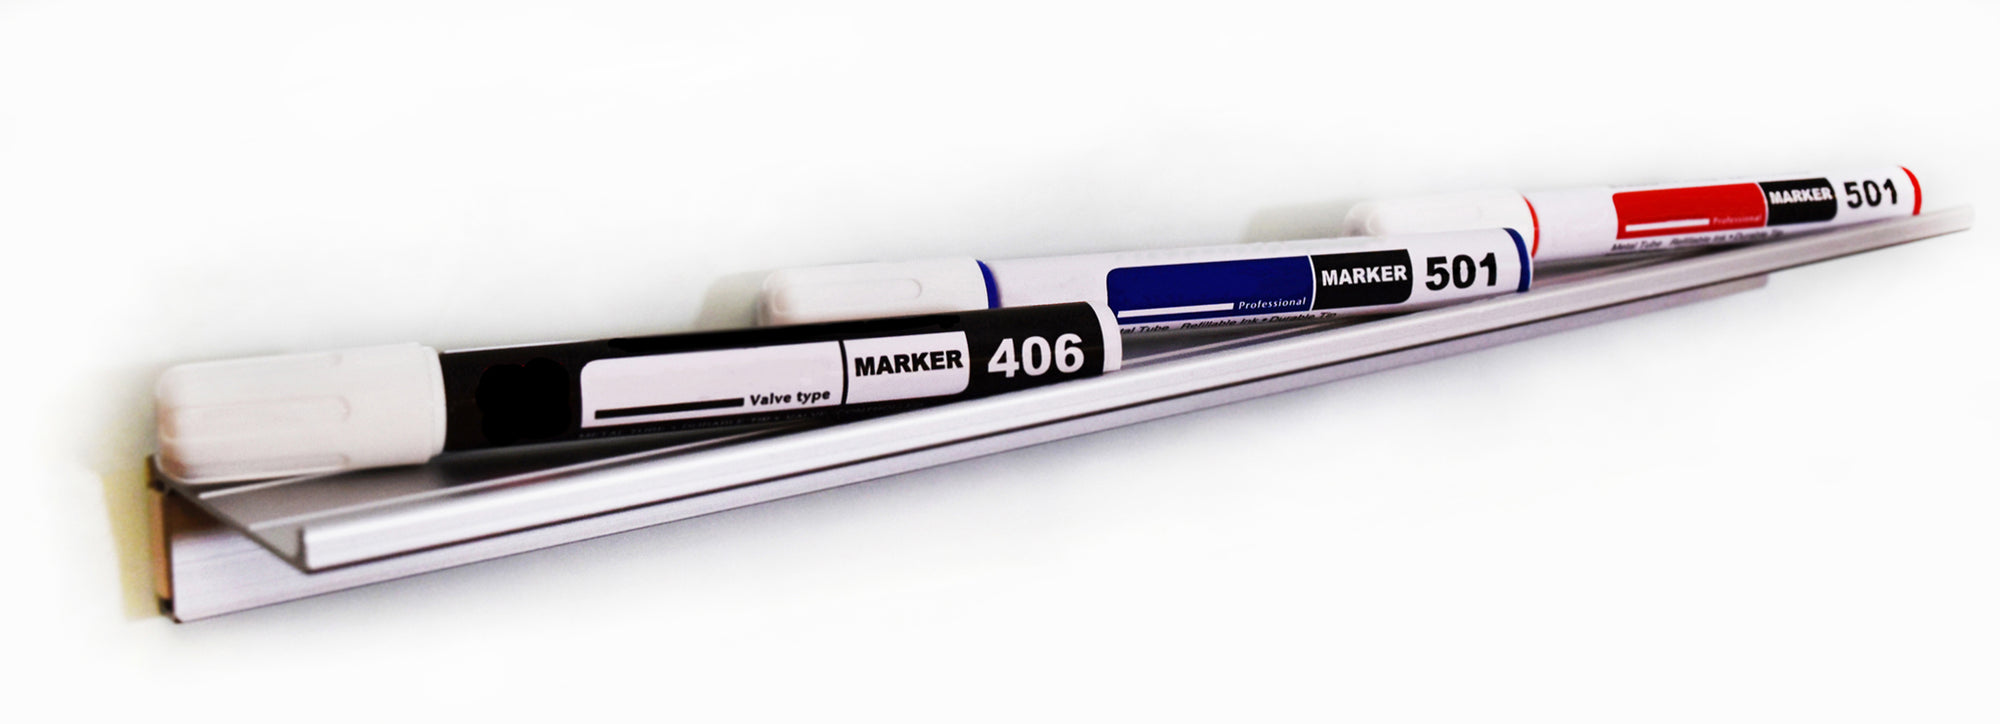 Audio-Visual Direct Magnetic Marker Tray for Glass Dry-Erase Boards - 15.75 L x 2.5 W Inches